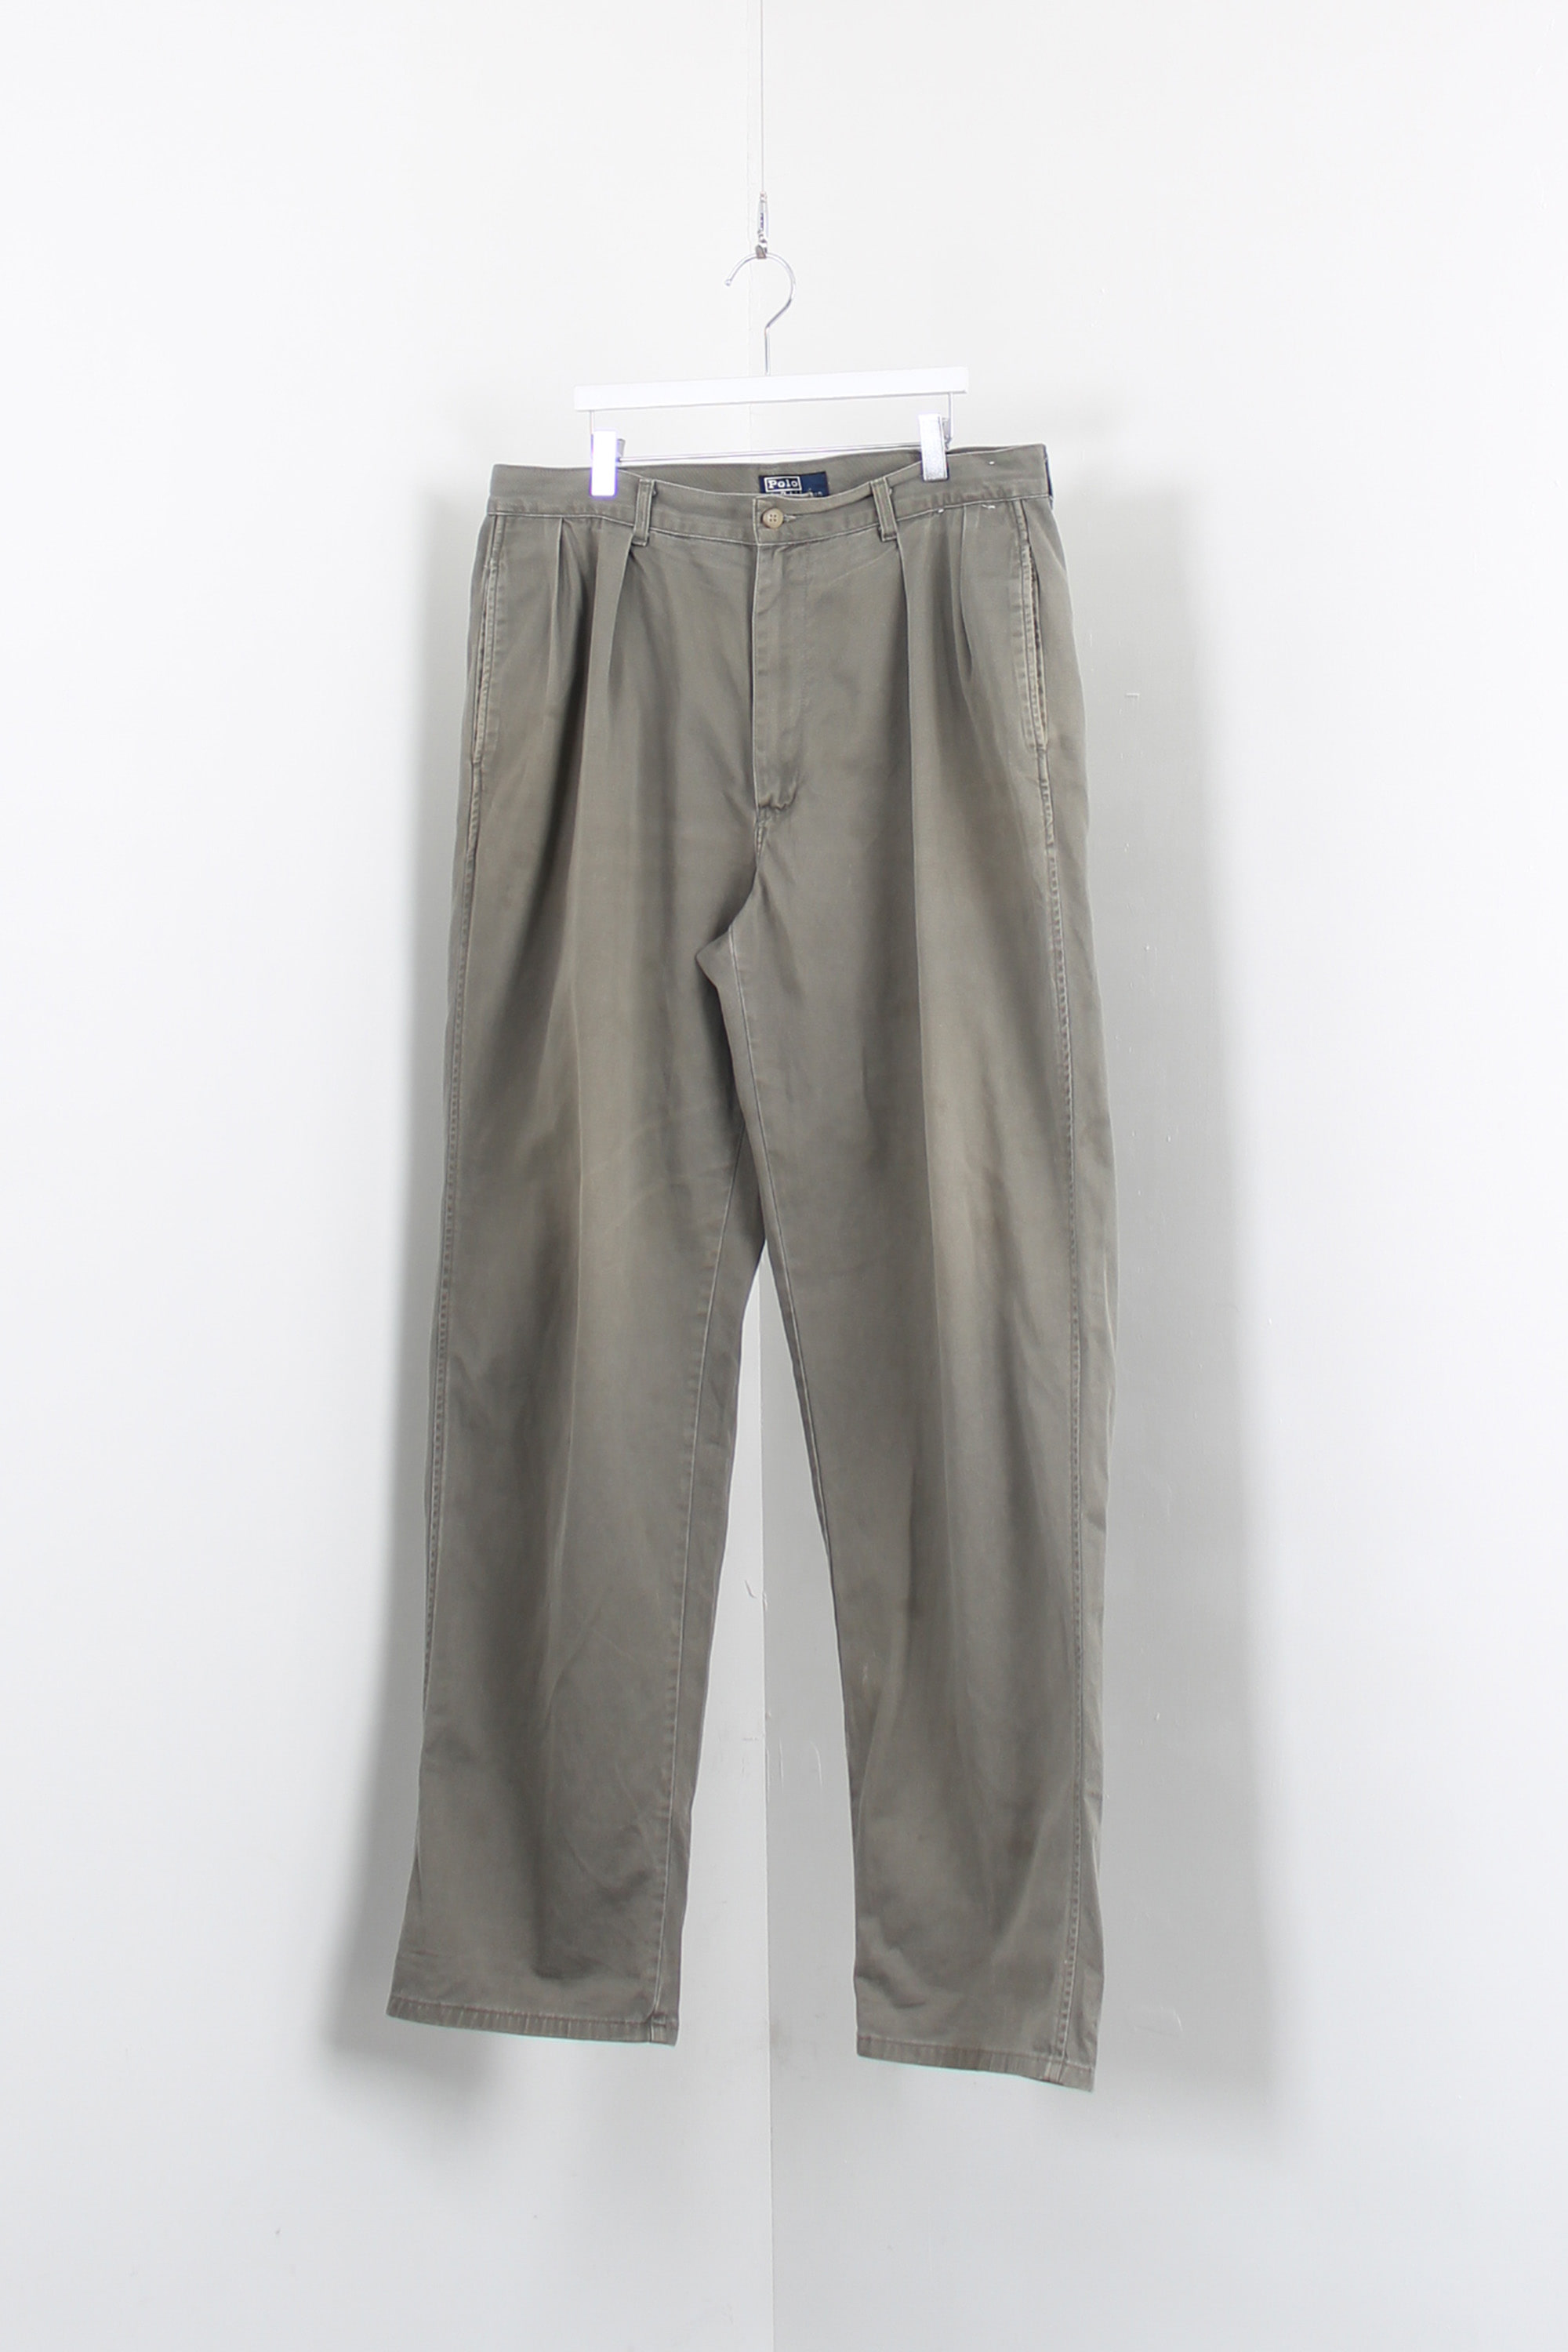 polo ralph lauren two tuck chino pants(made in usa)